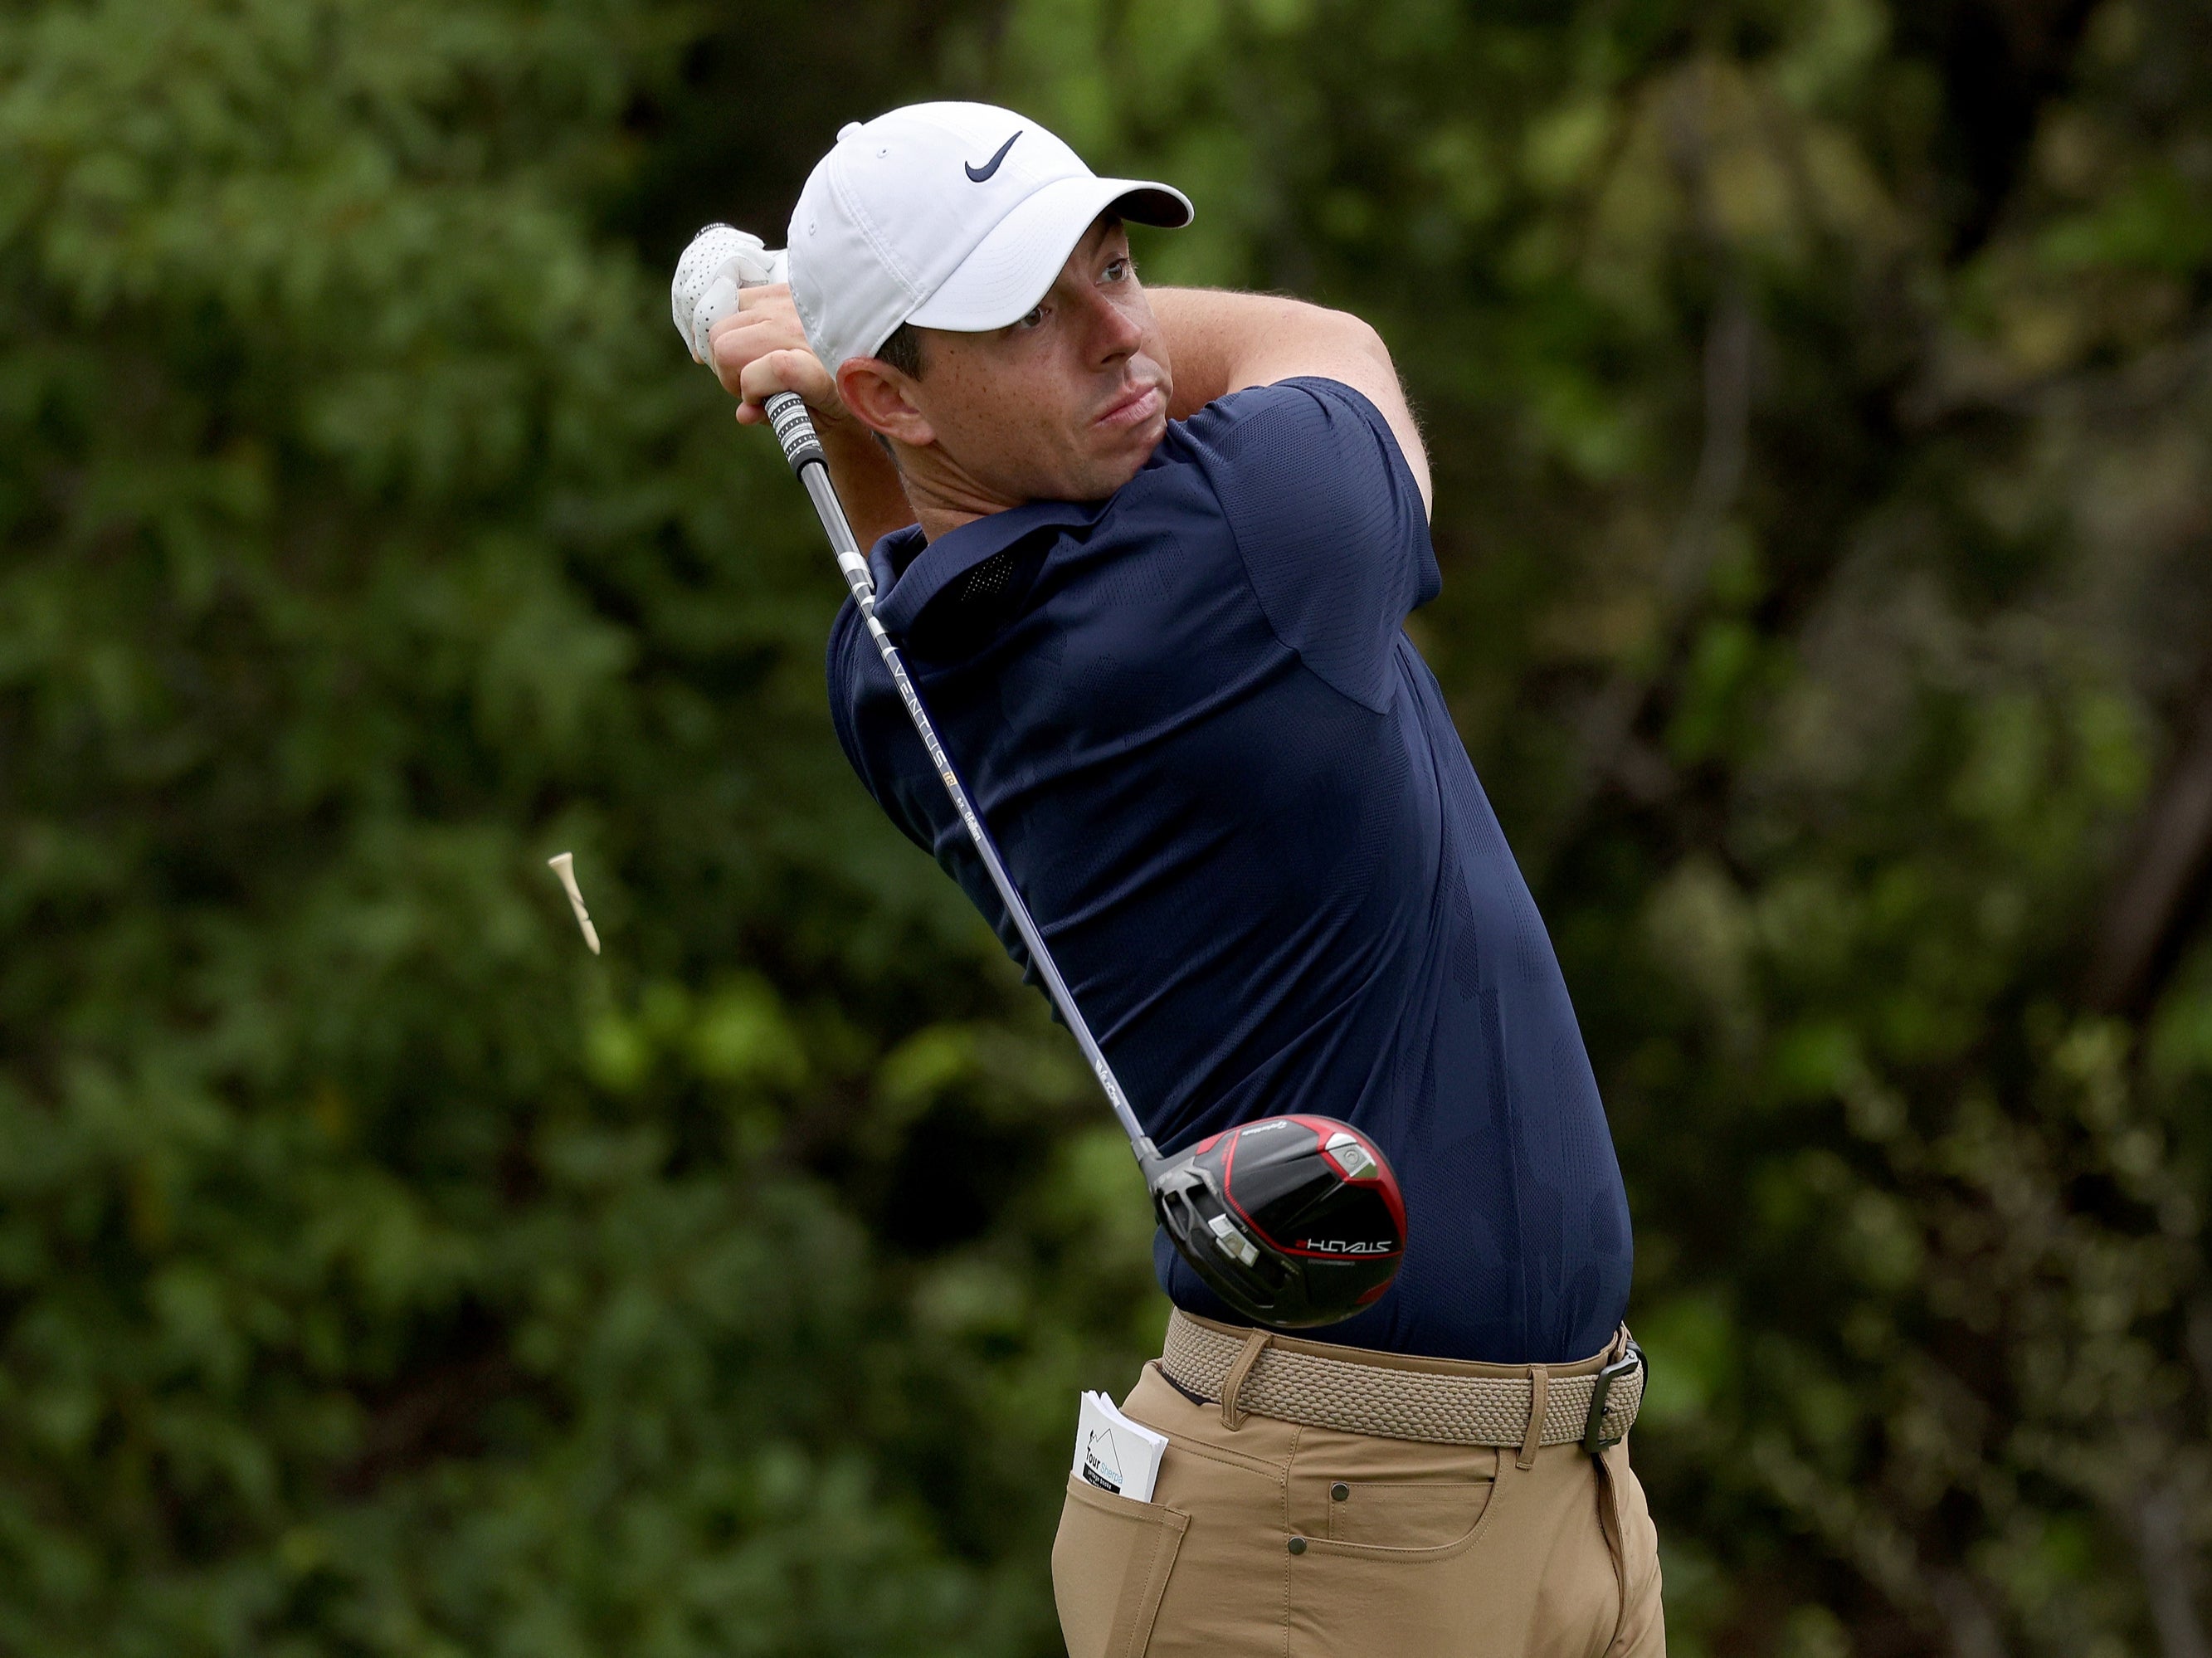 A green jacket still eludes four-time major champion Rory McIlroy